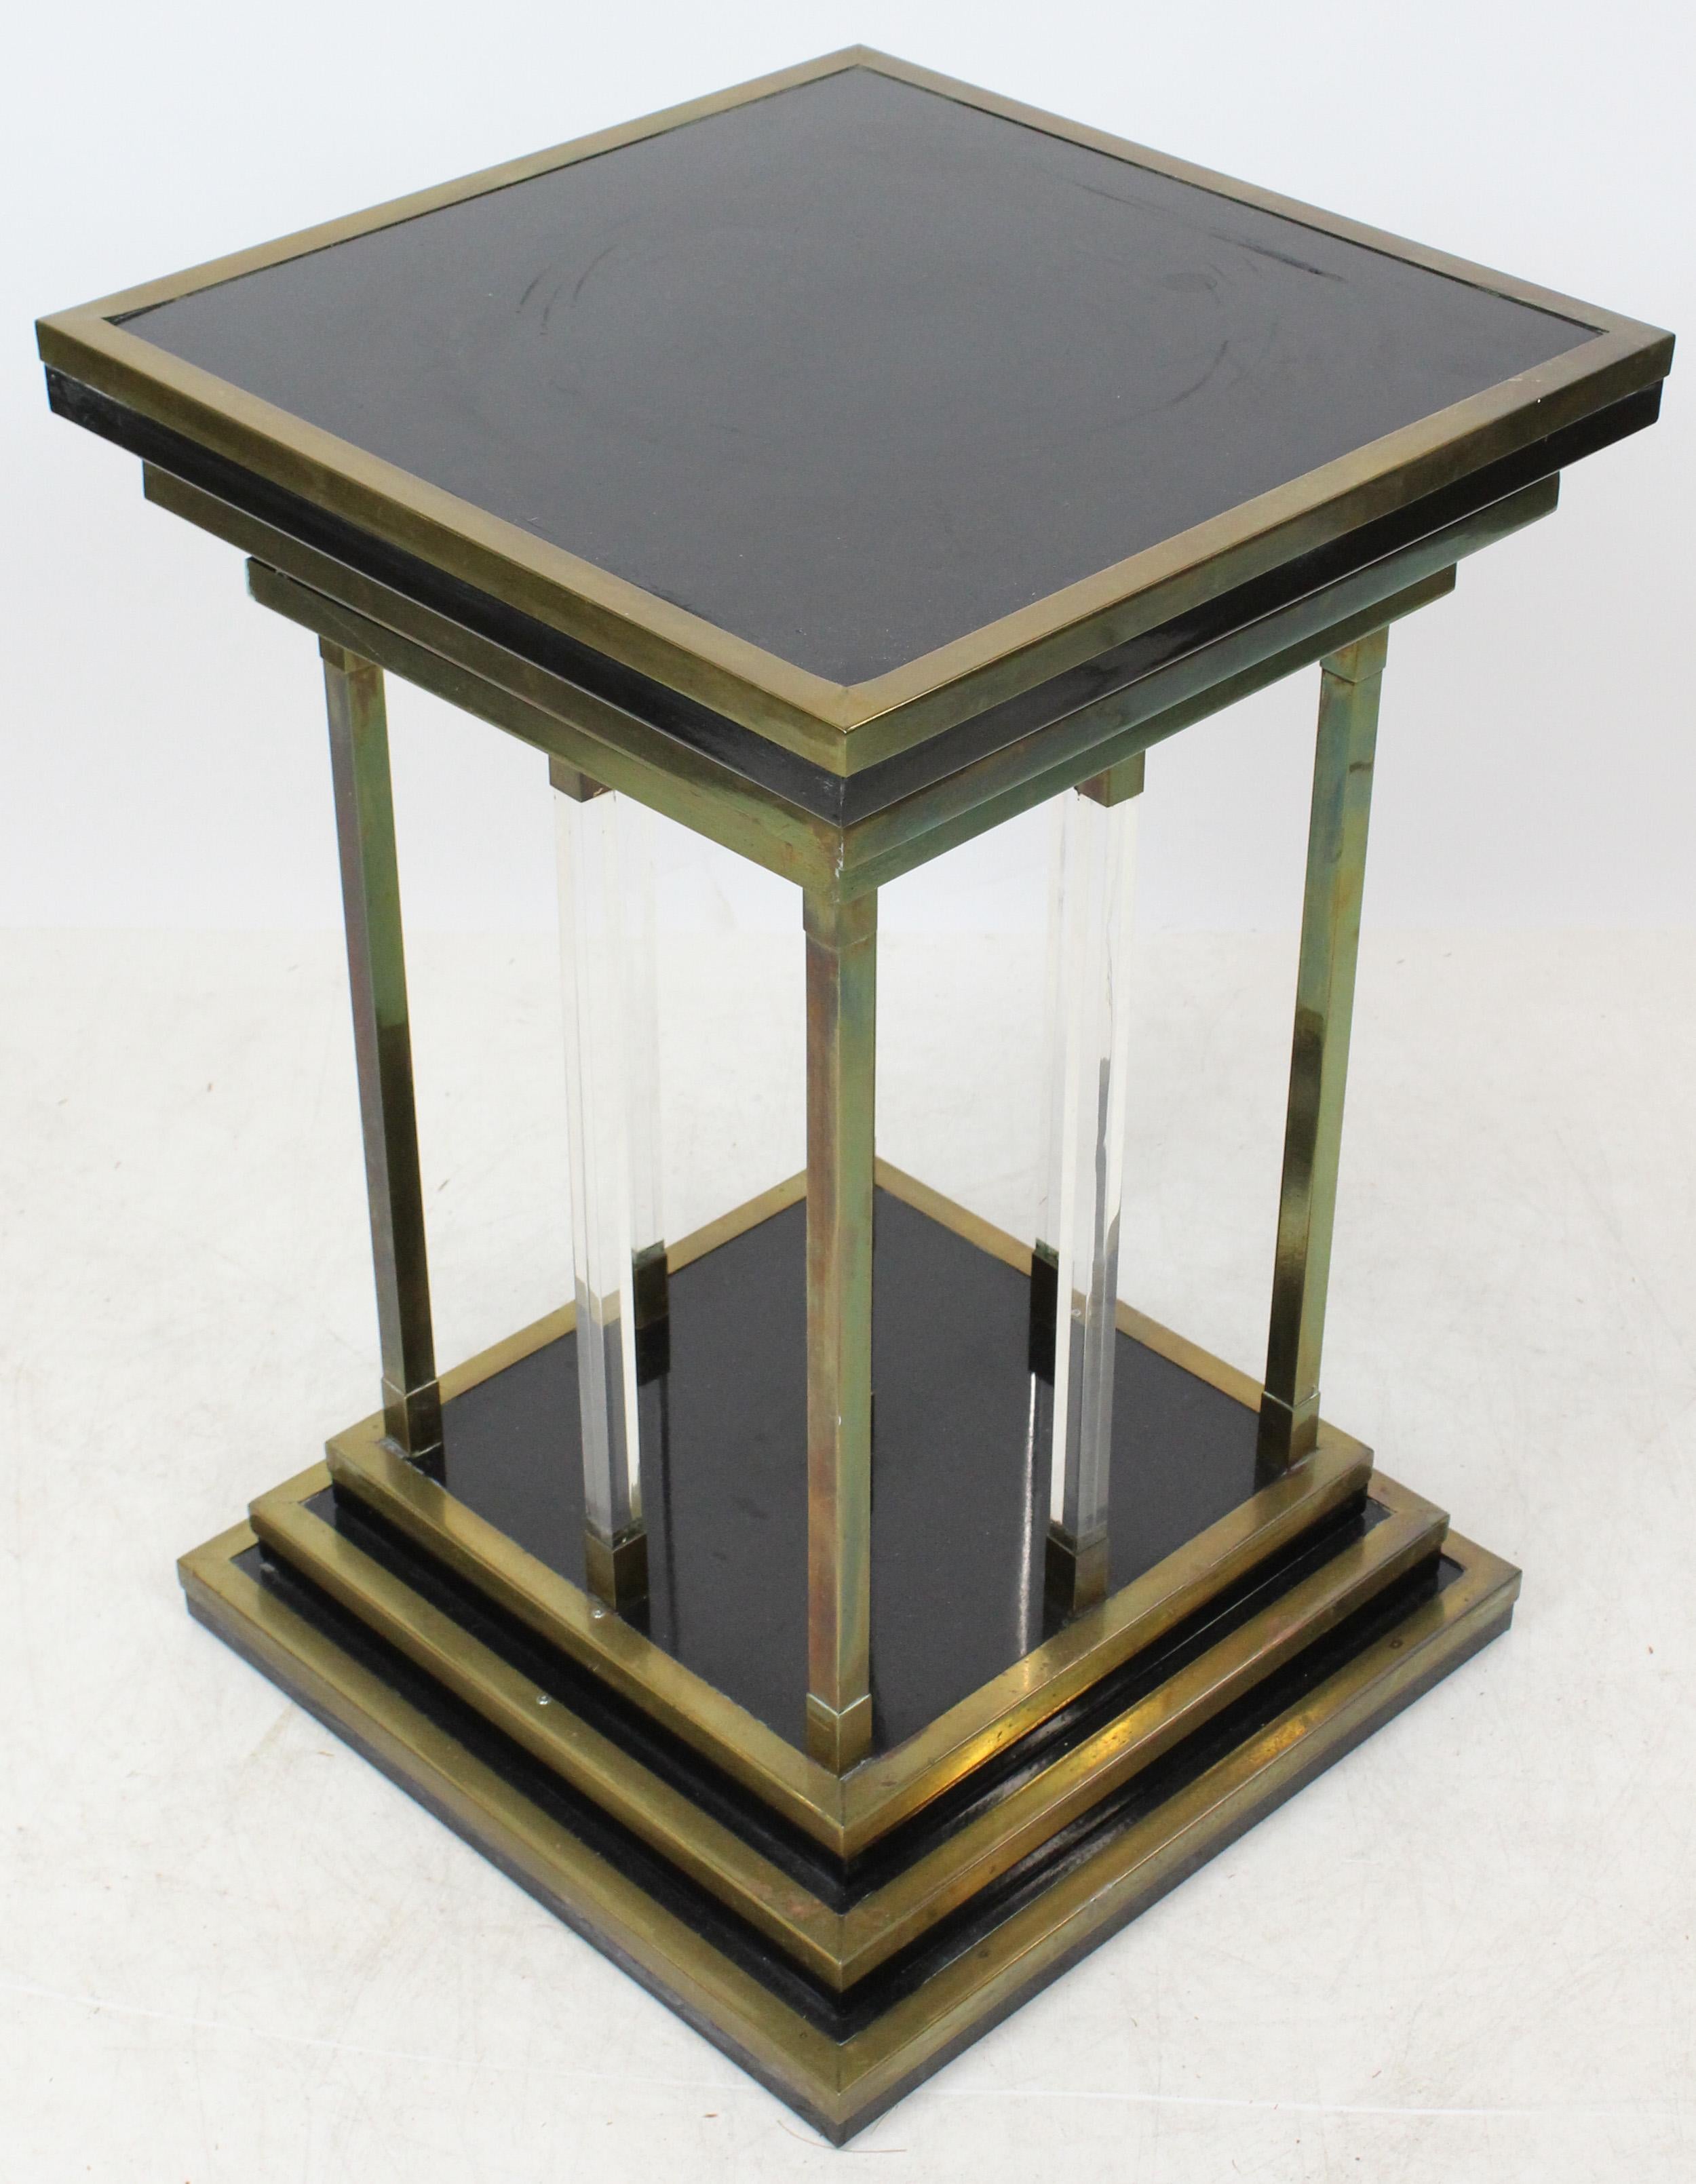 Dramatic and sleek. This is a very beautiful and sturdy pedestal for display. Of good size and strength.